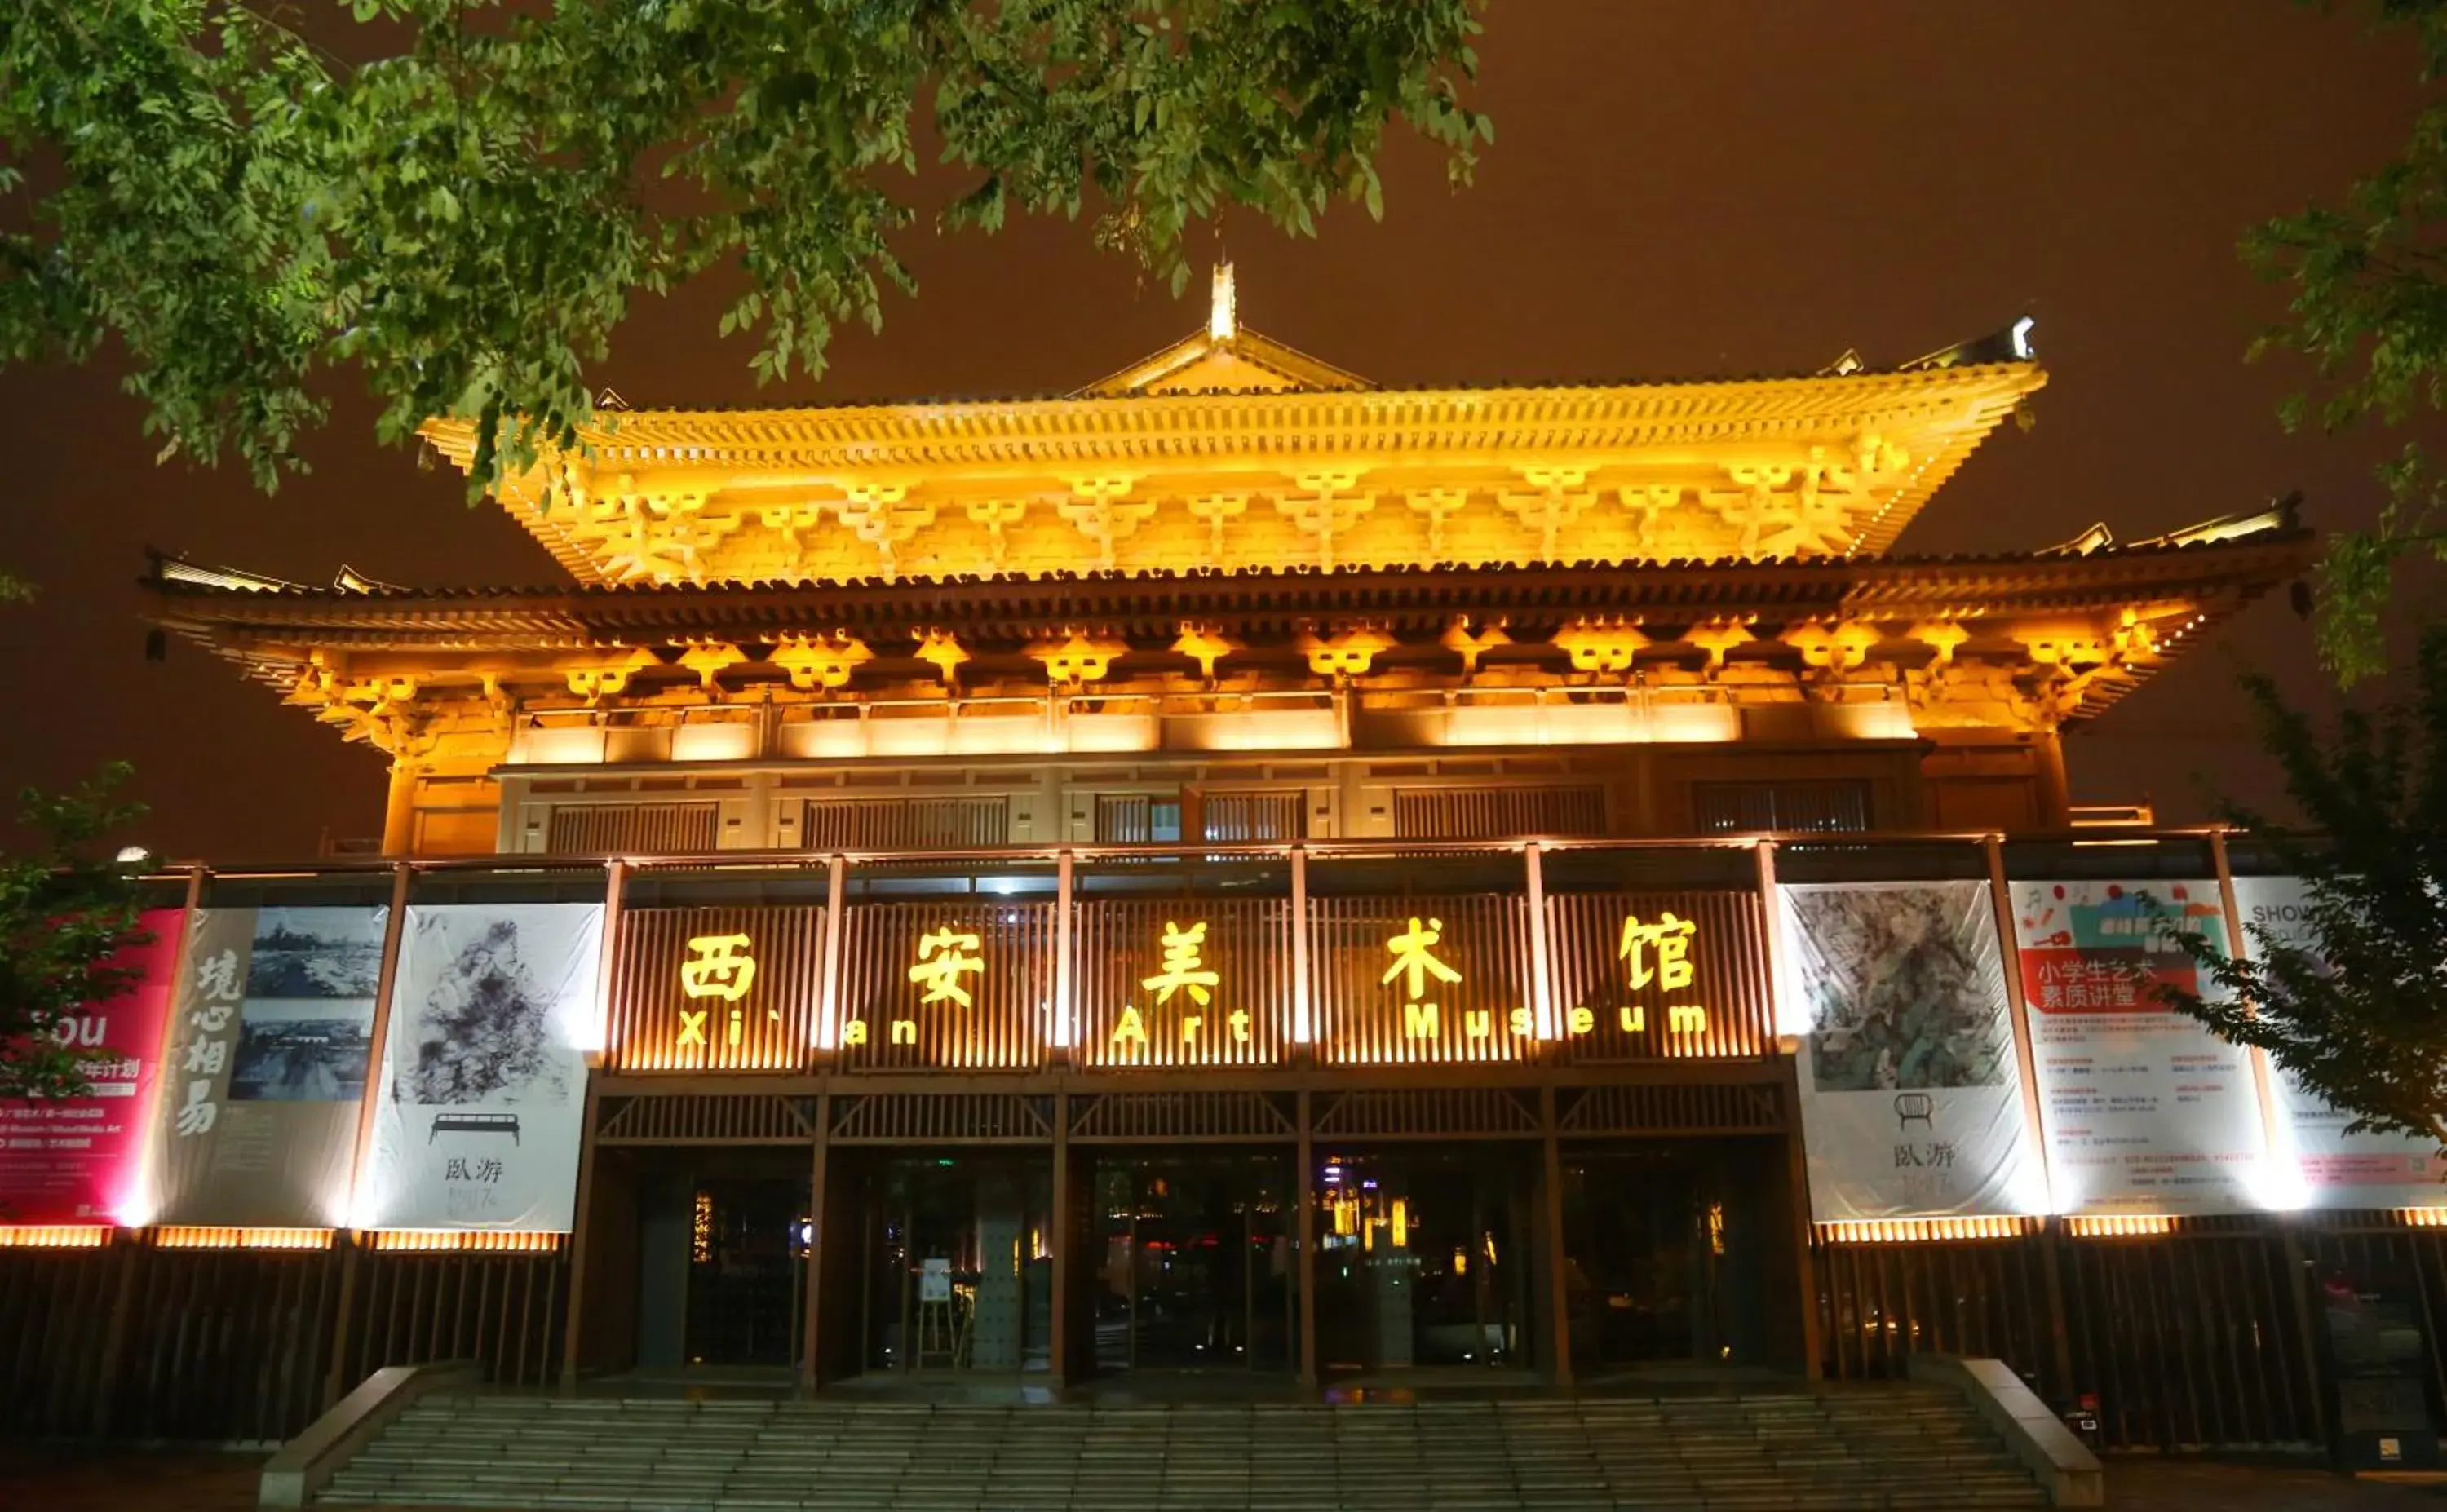 Nearby landmark, Property Building in Wyndham Grand Xi'an South